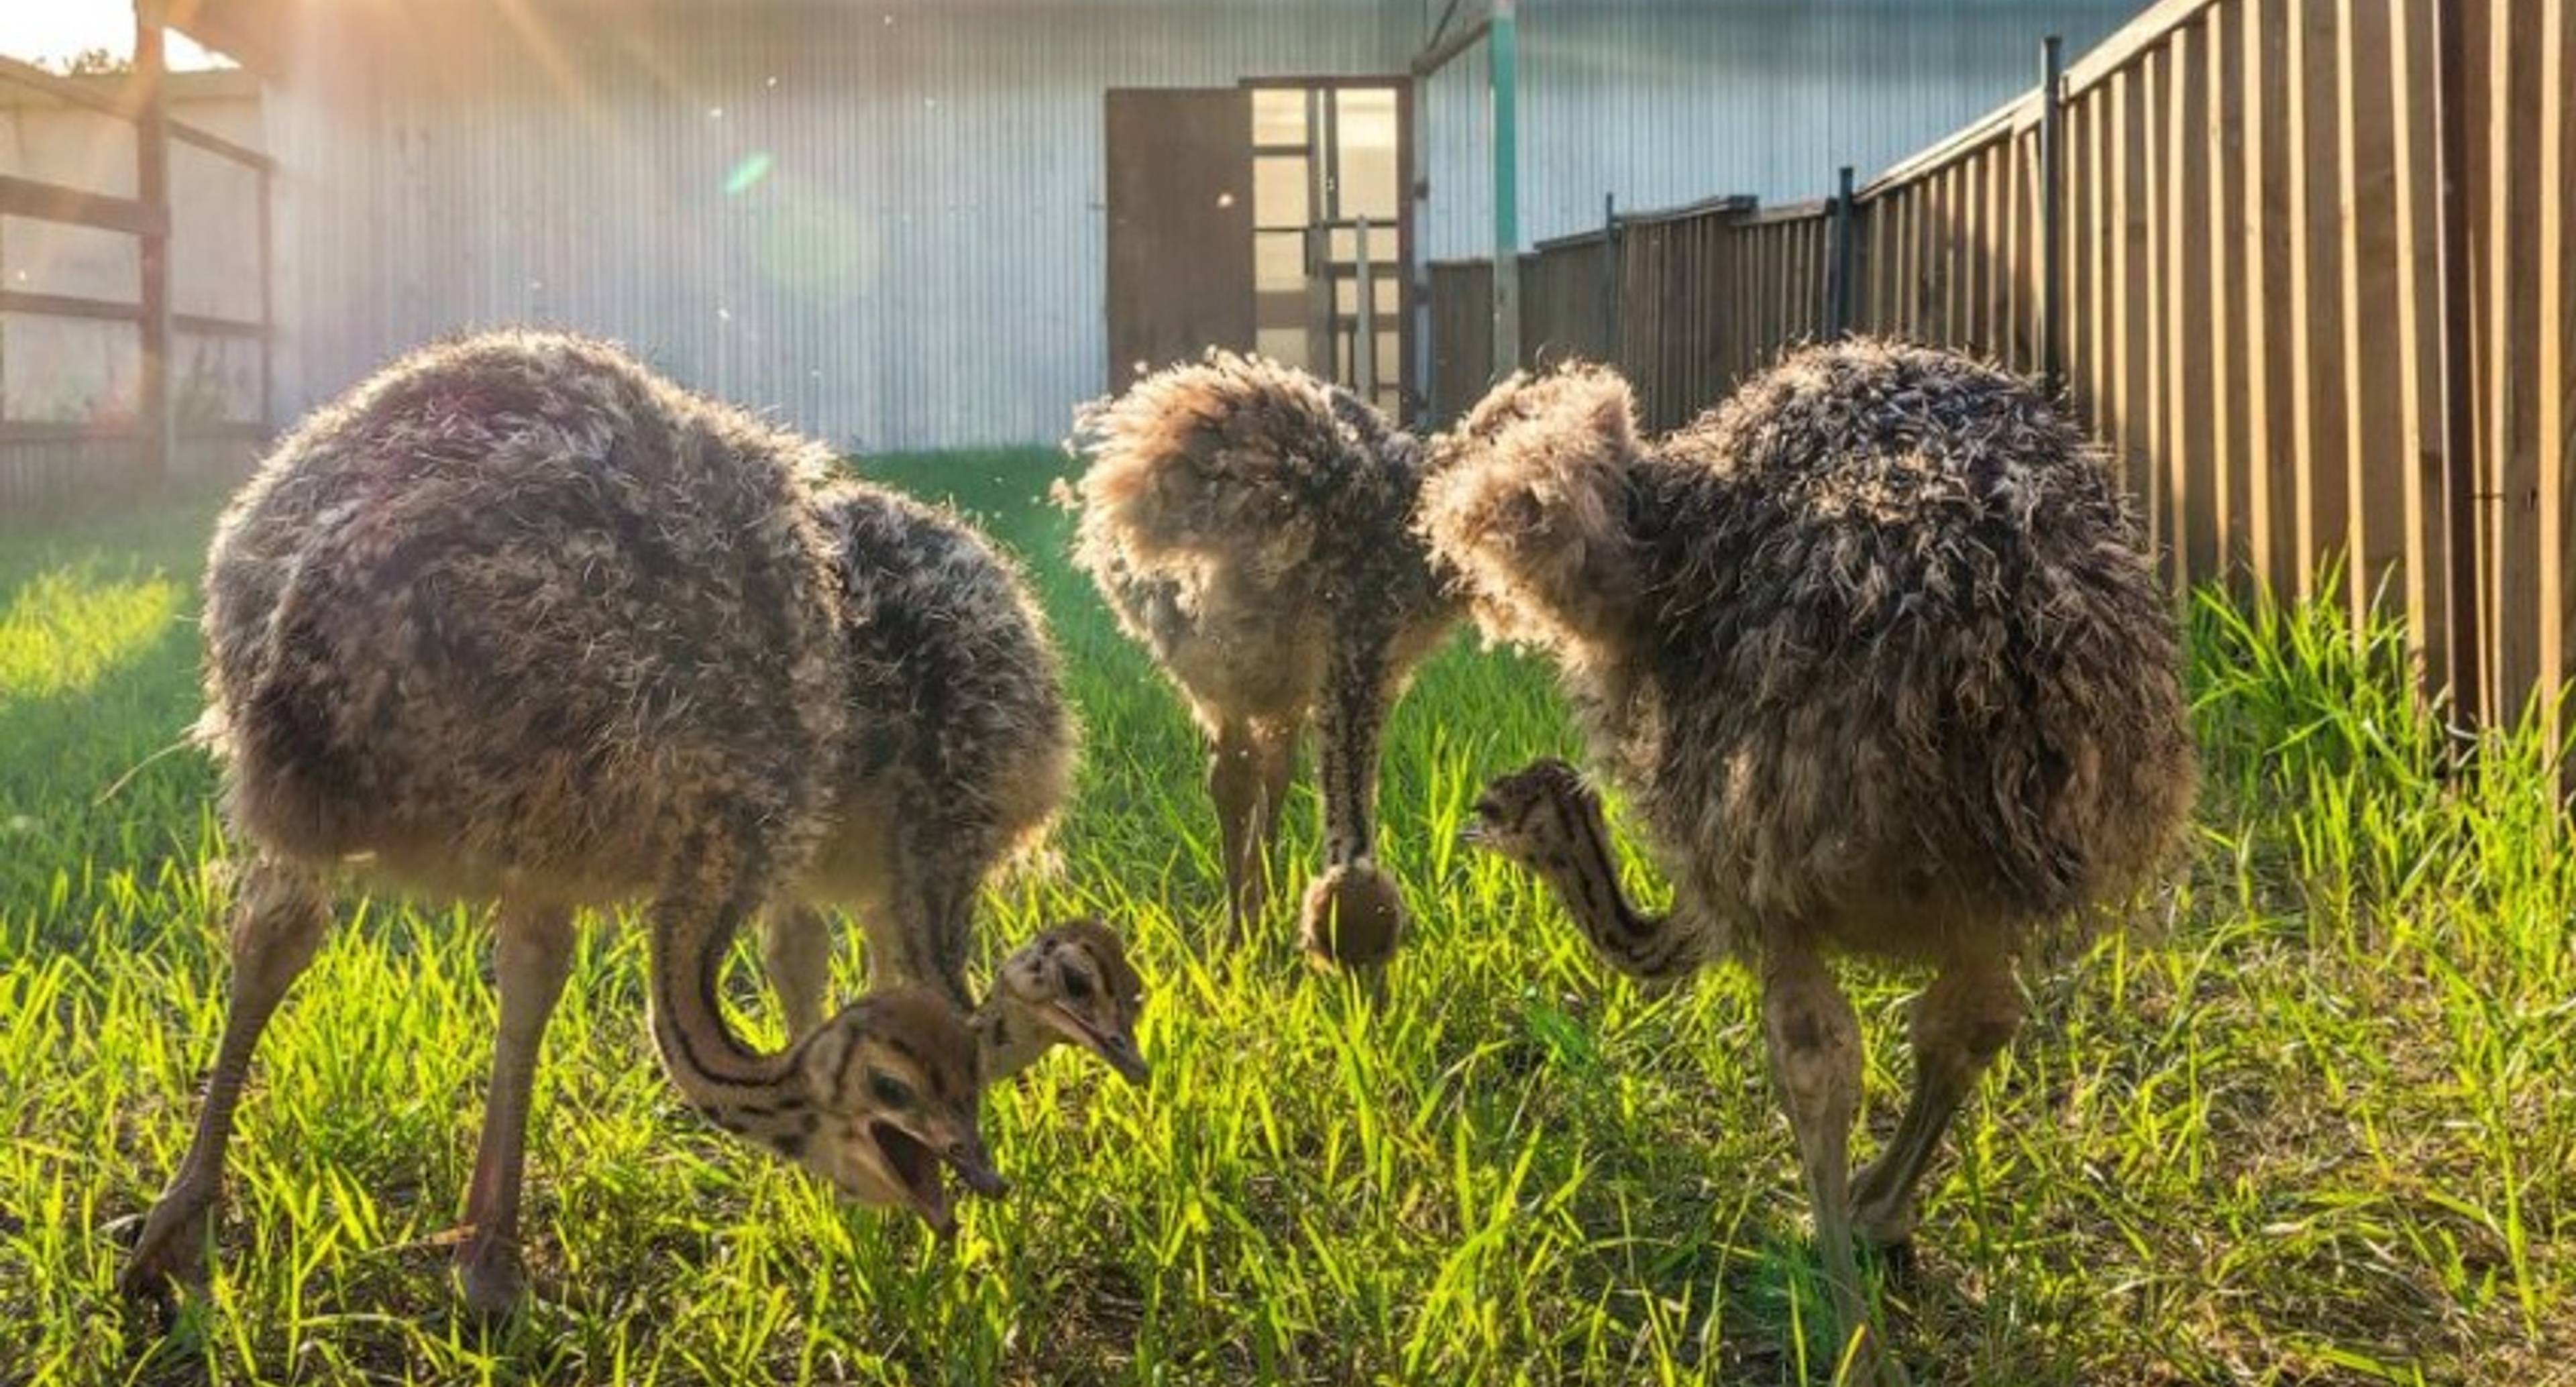 Meet the ostriches and their feathered friends.